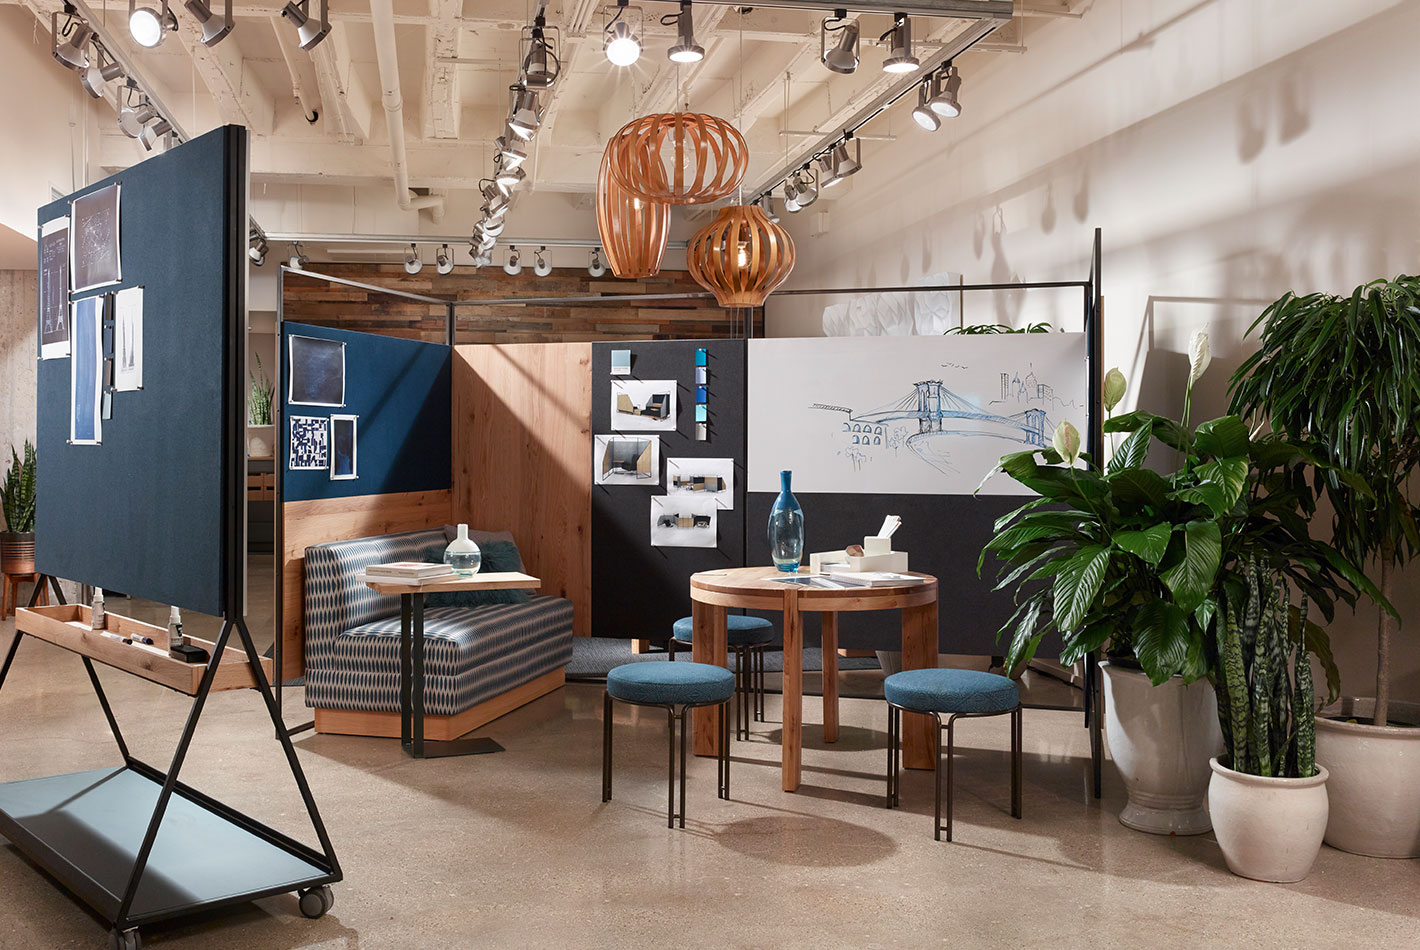 Casual seating and dining furniture set up in a sales vignette at West Elm's NeoCon showroom